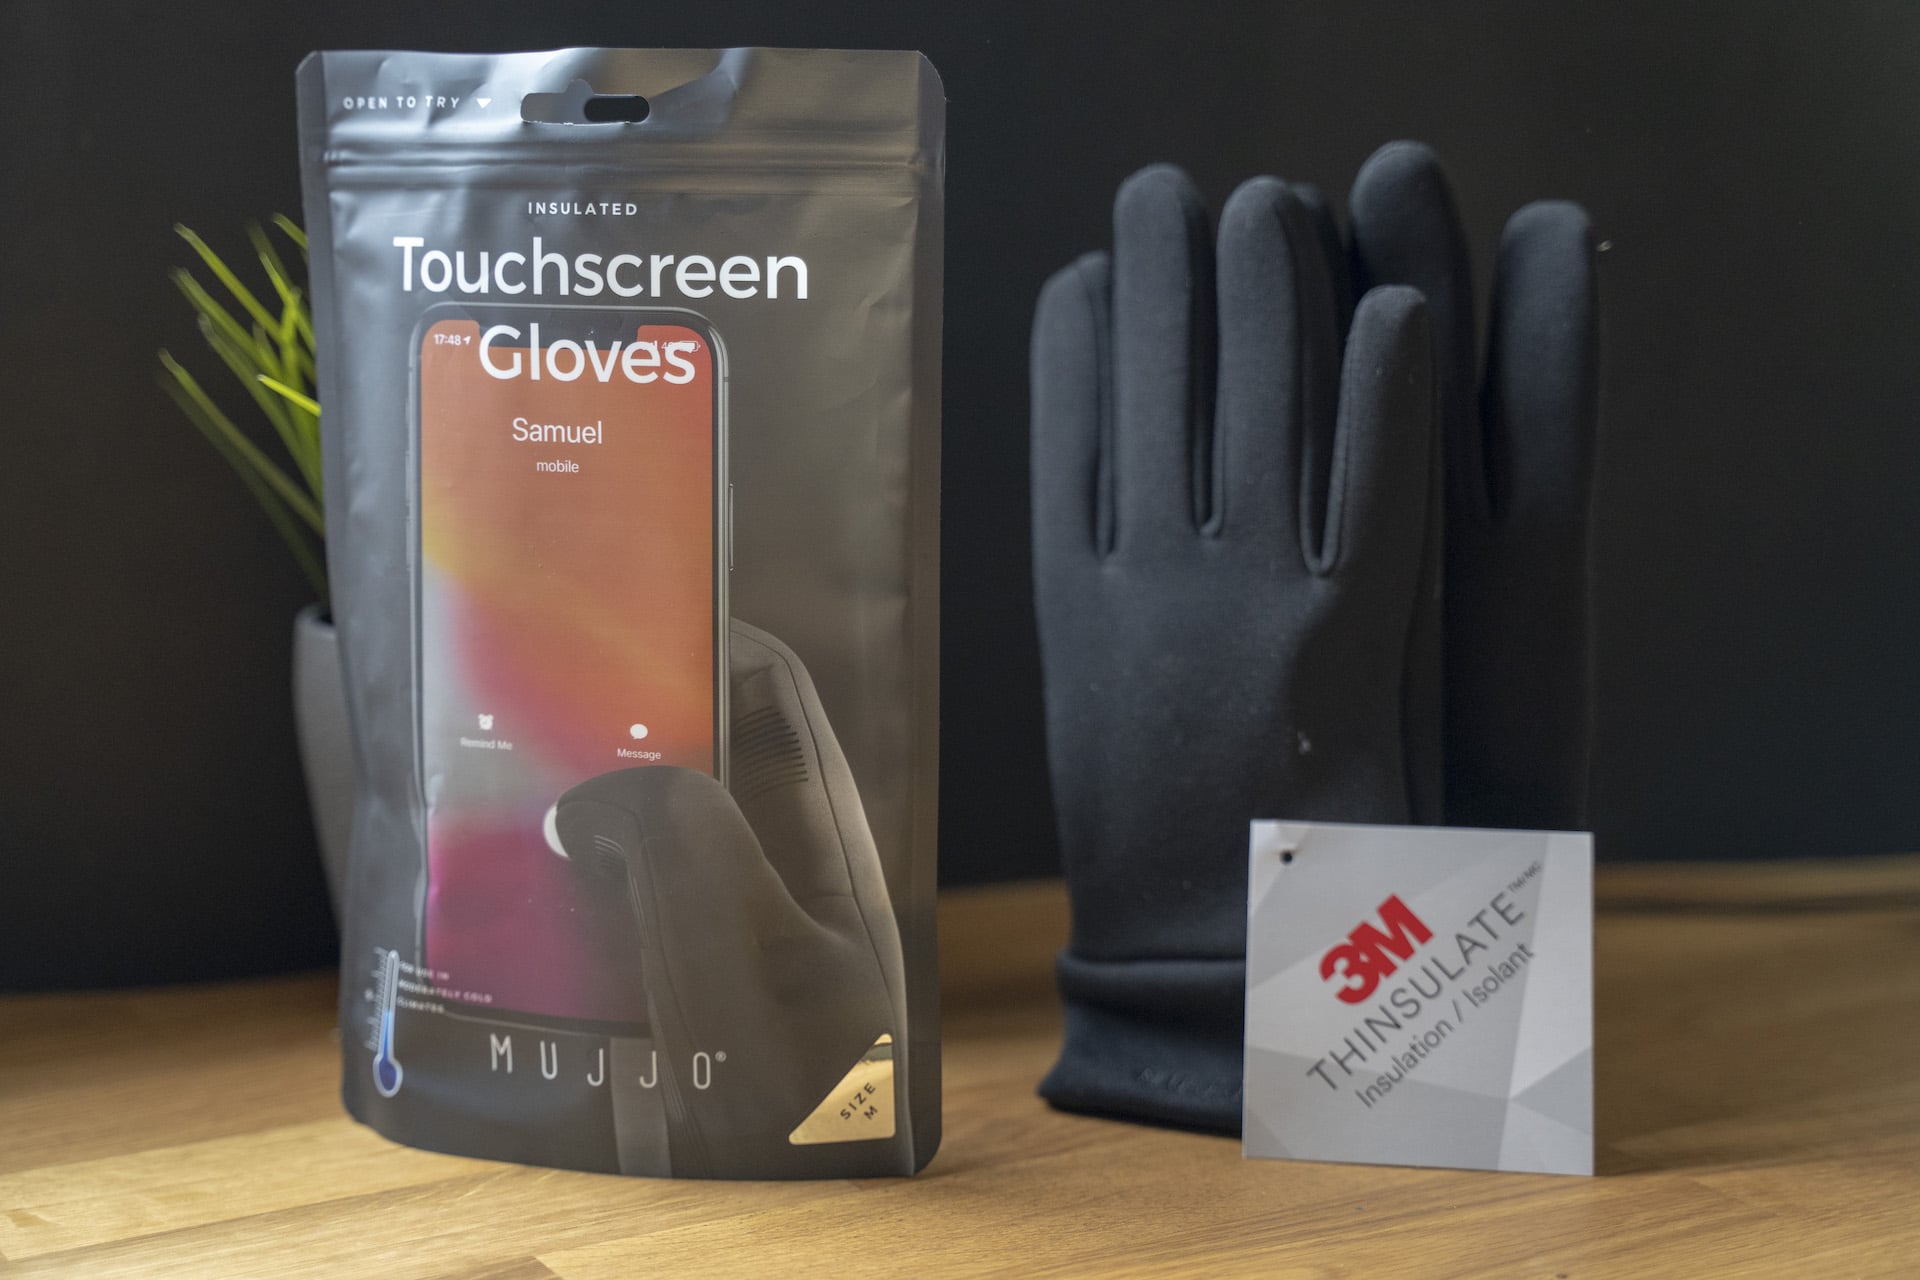 análisis guantes Insulated Touchscreen mujjo